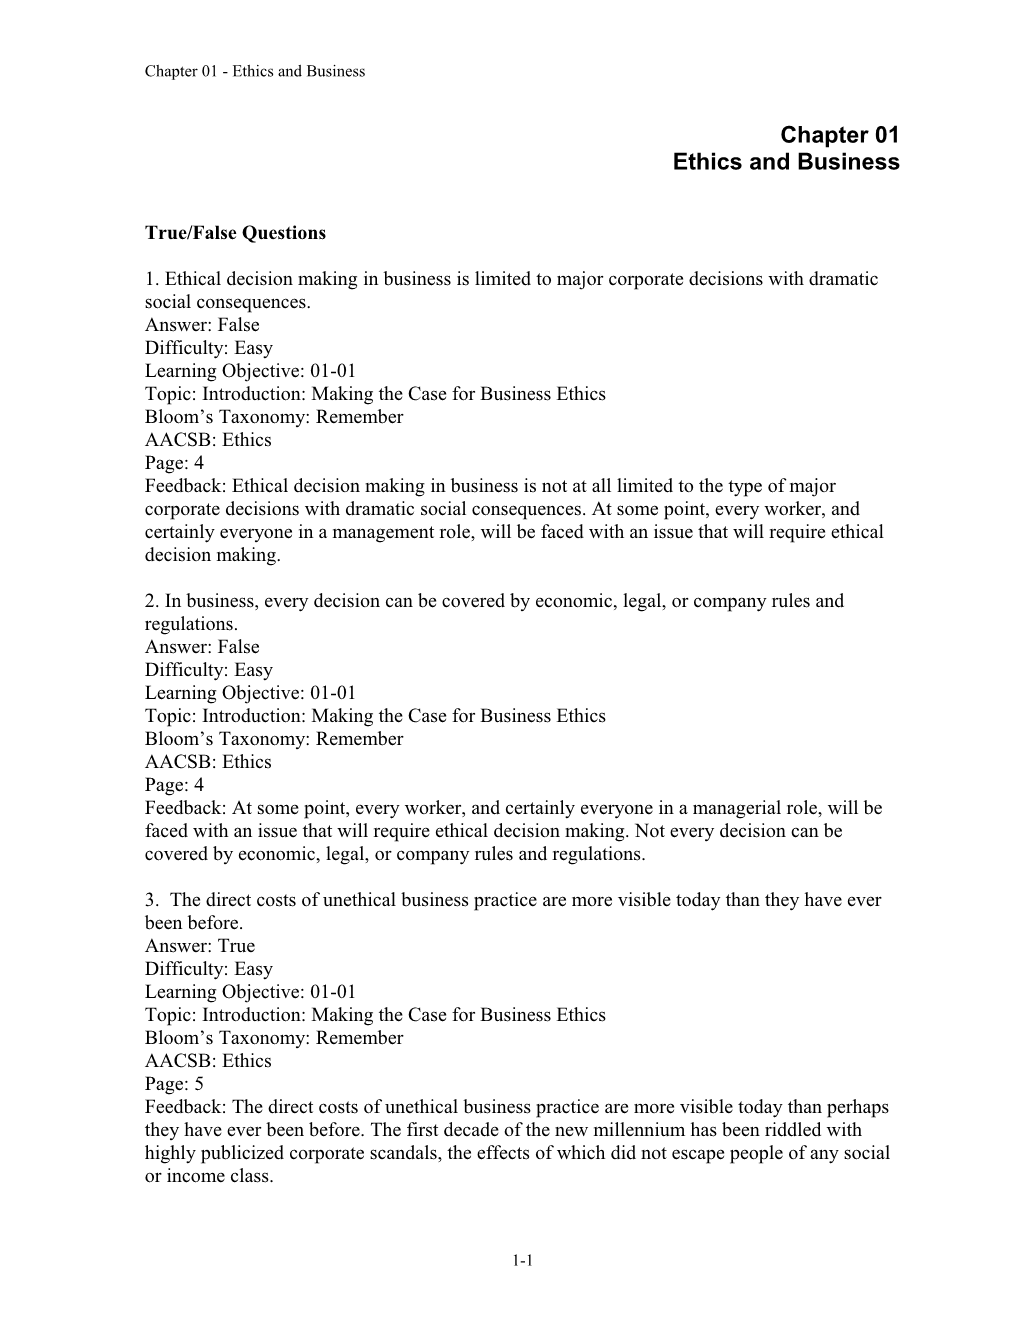 Chapter 01 Ethics and Business